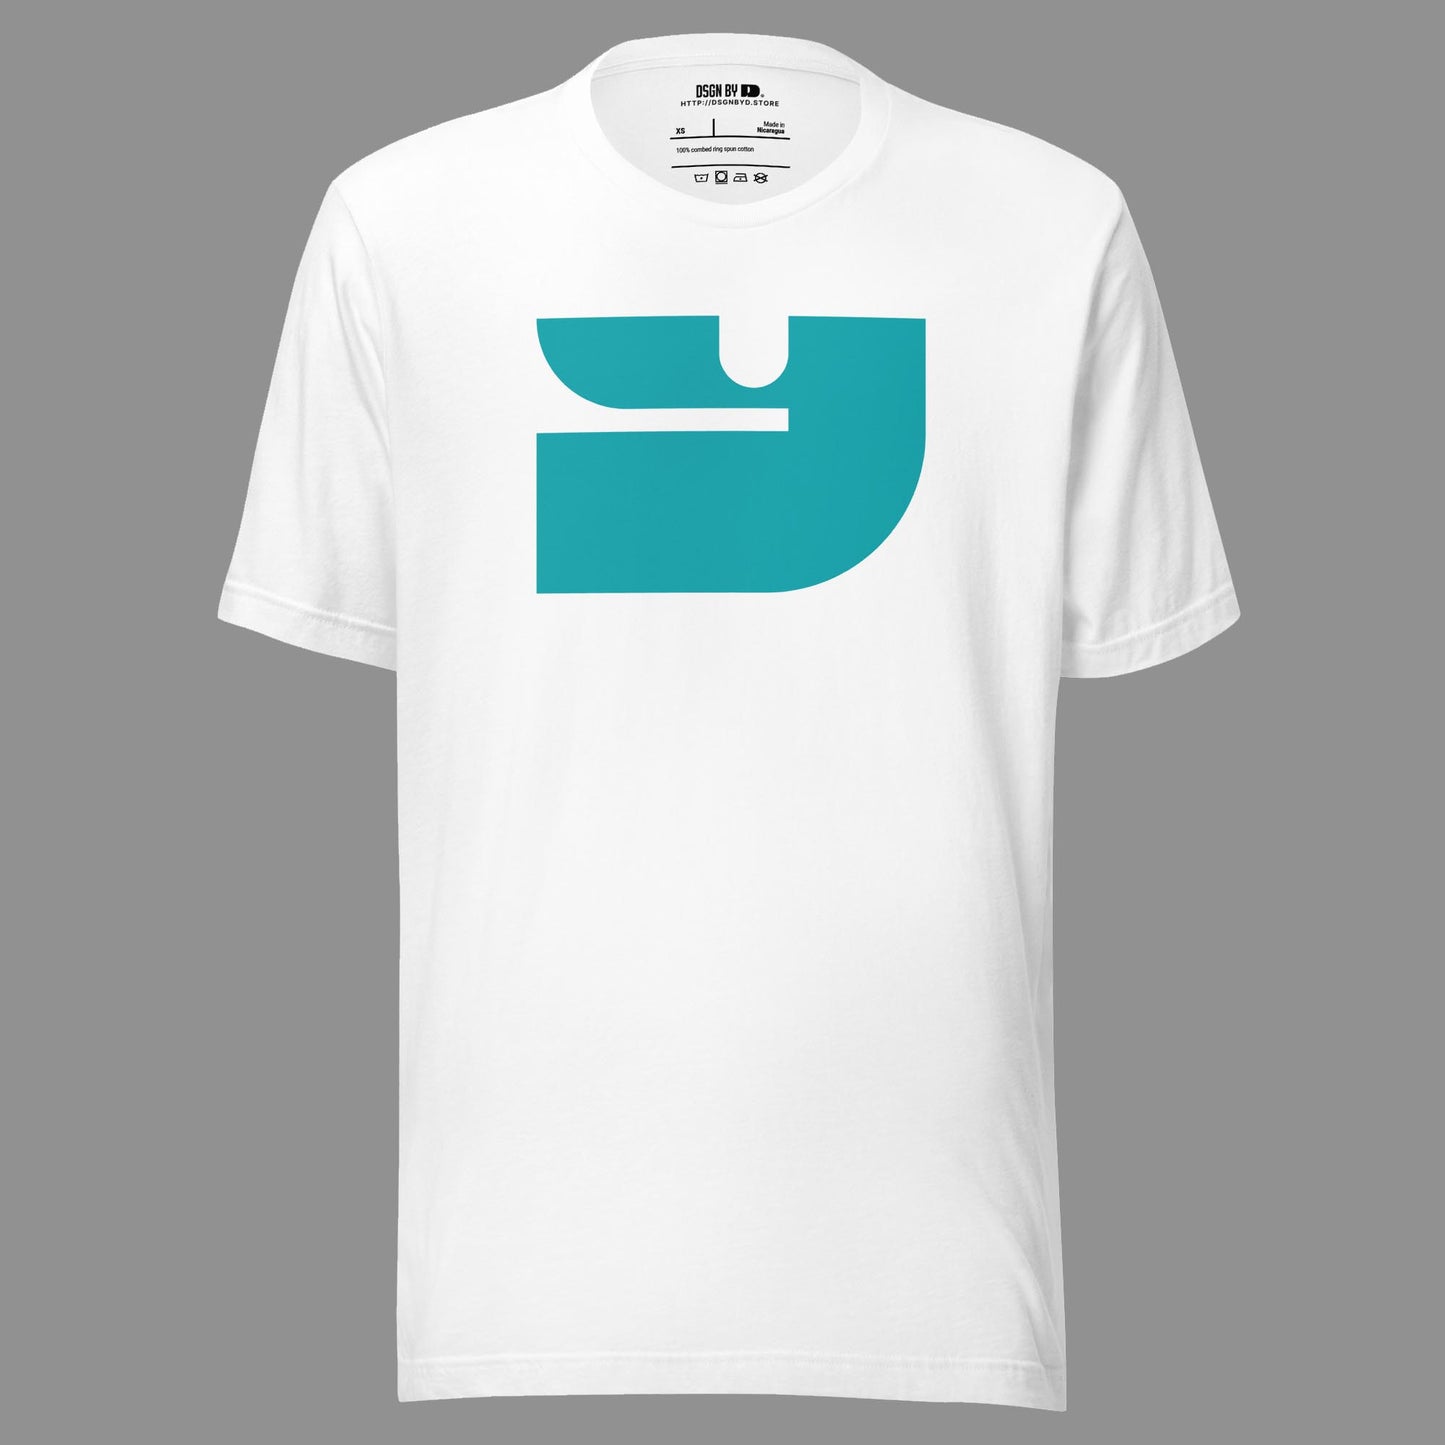 A white cotton unisex graphic tee with letter Y.